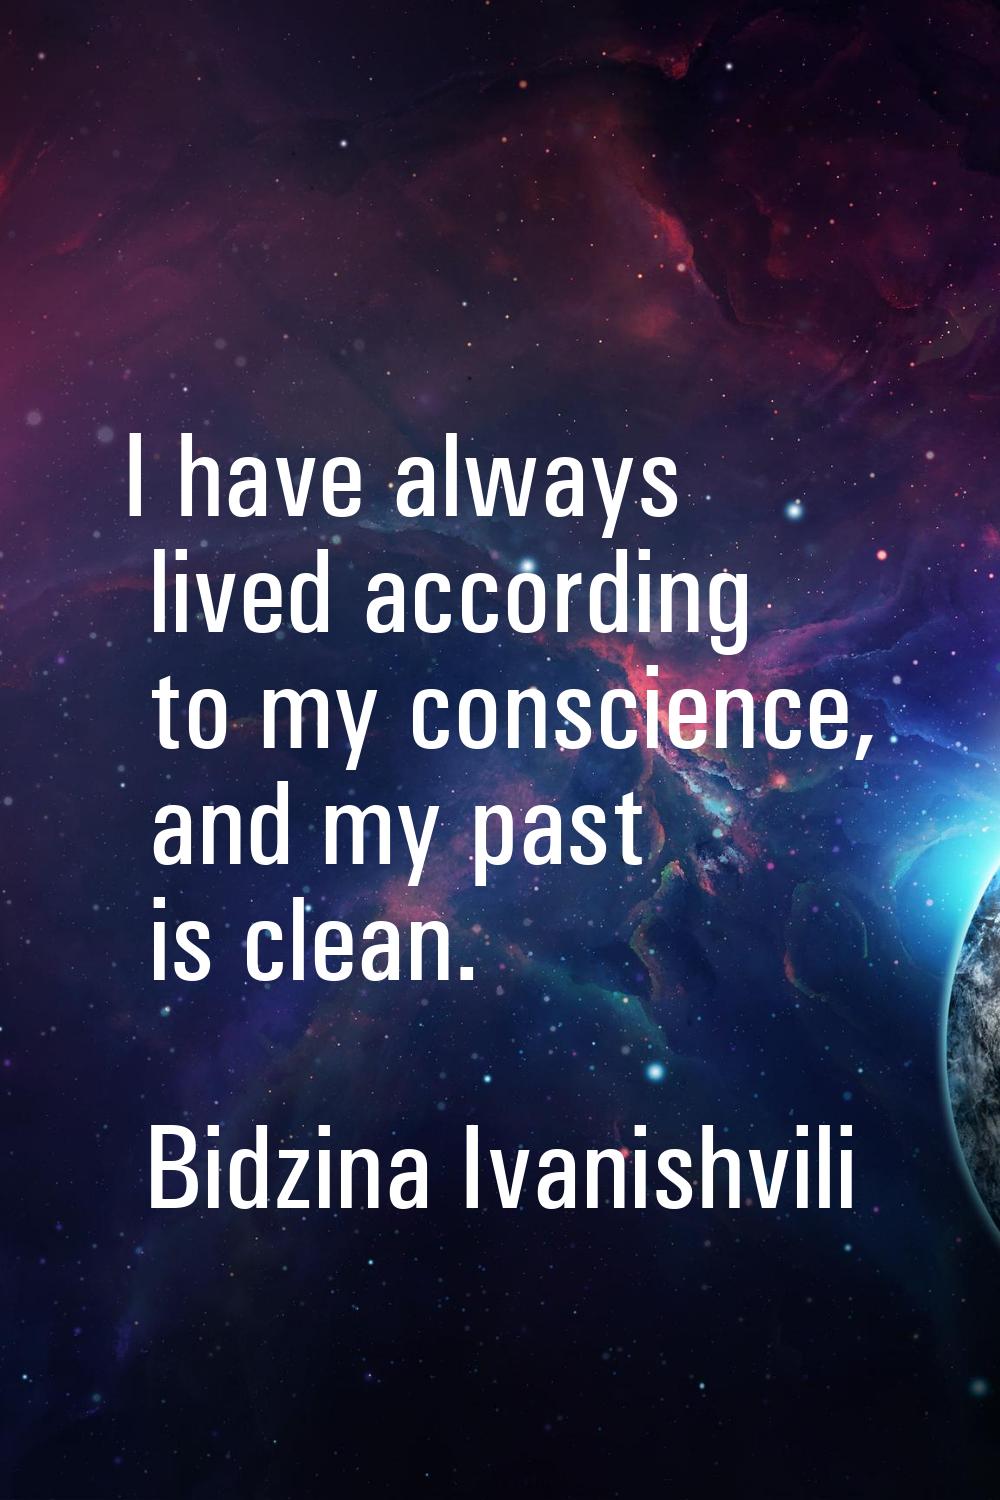 I have always lived according to my conscience, and my past is clean.